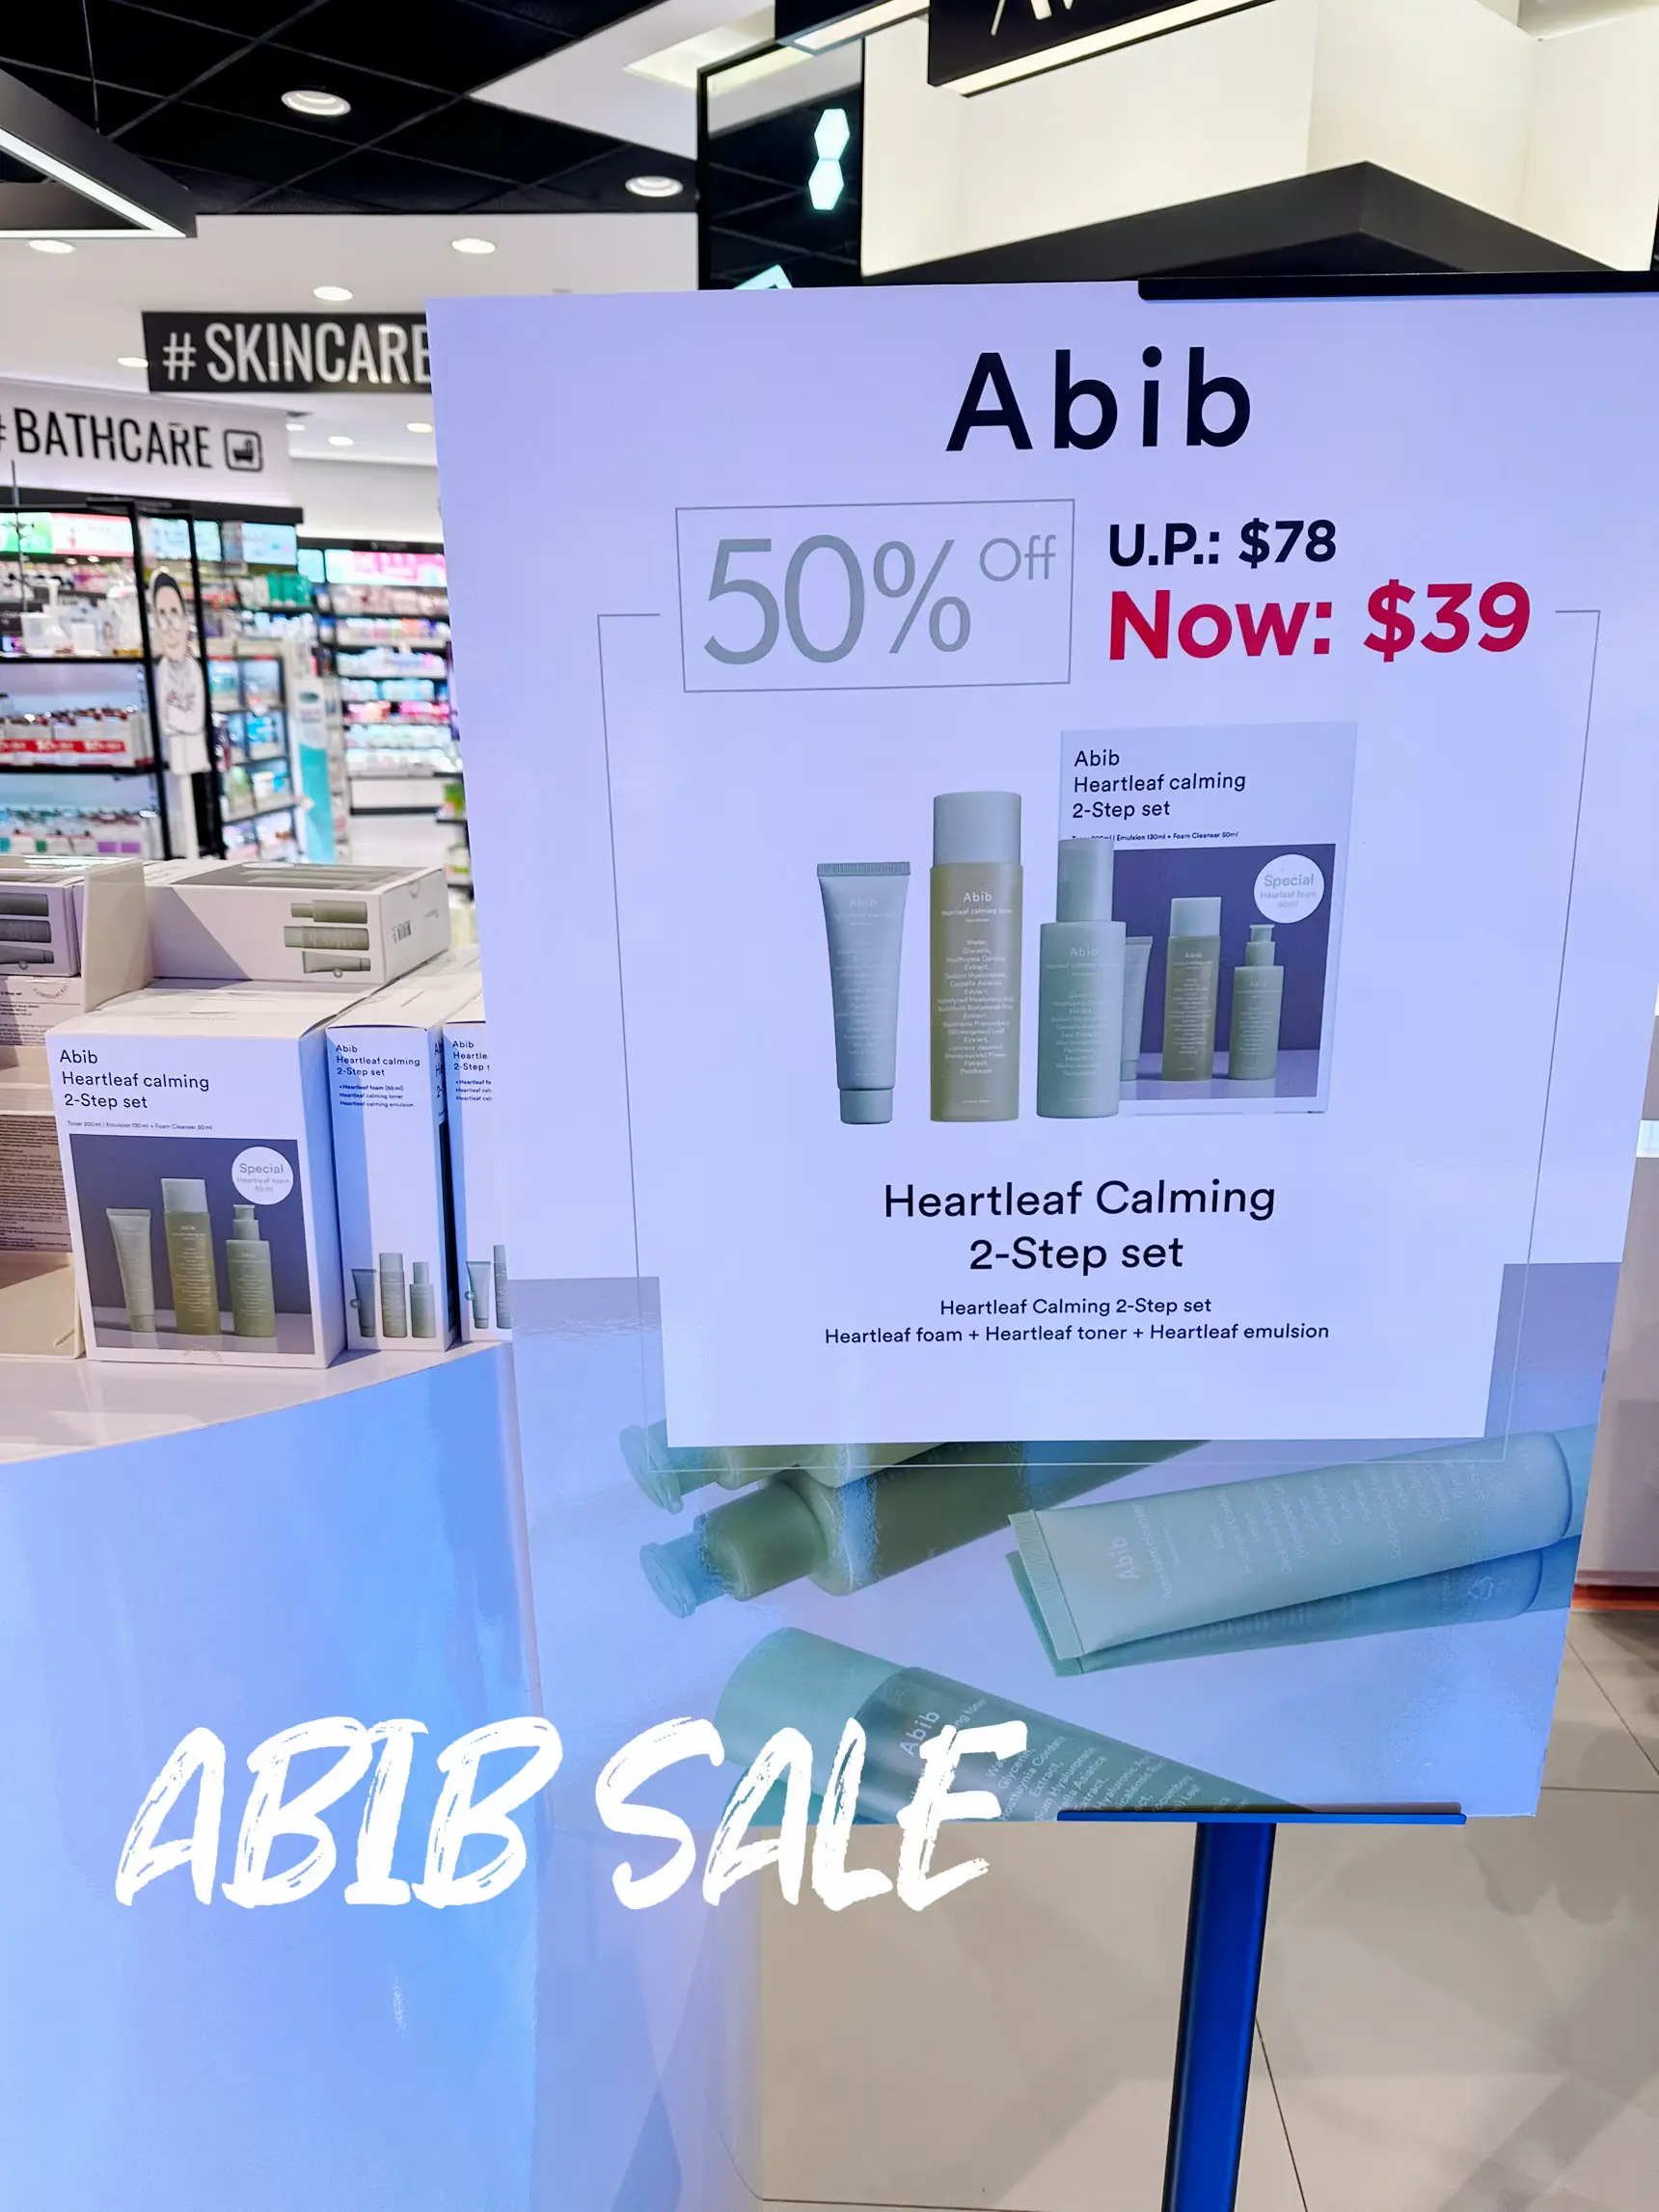 Up to 50% ABIB SALE in Watsons! 's images